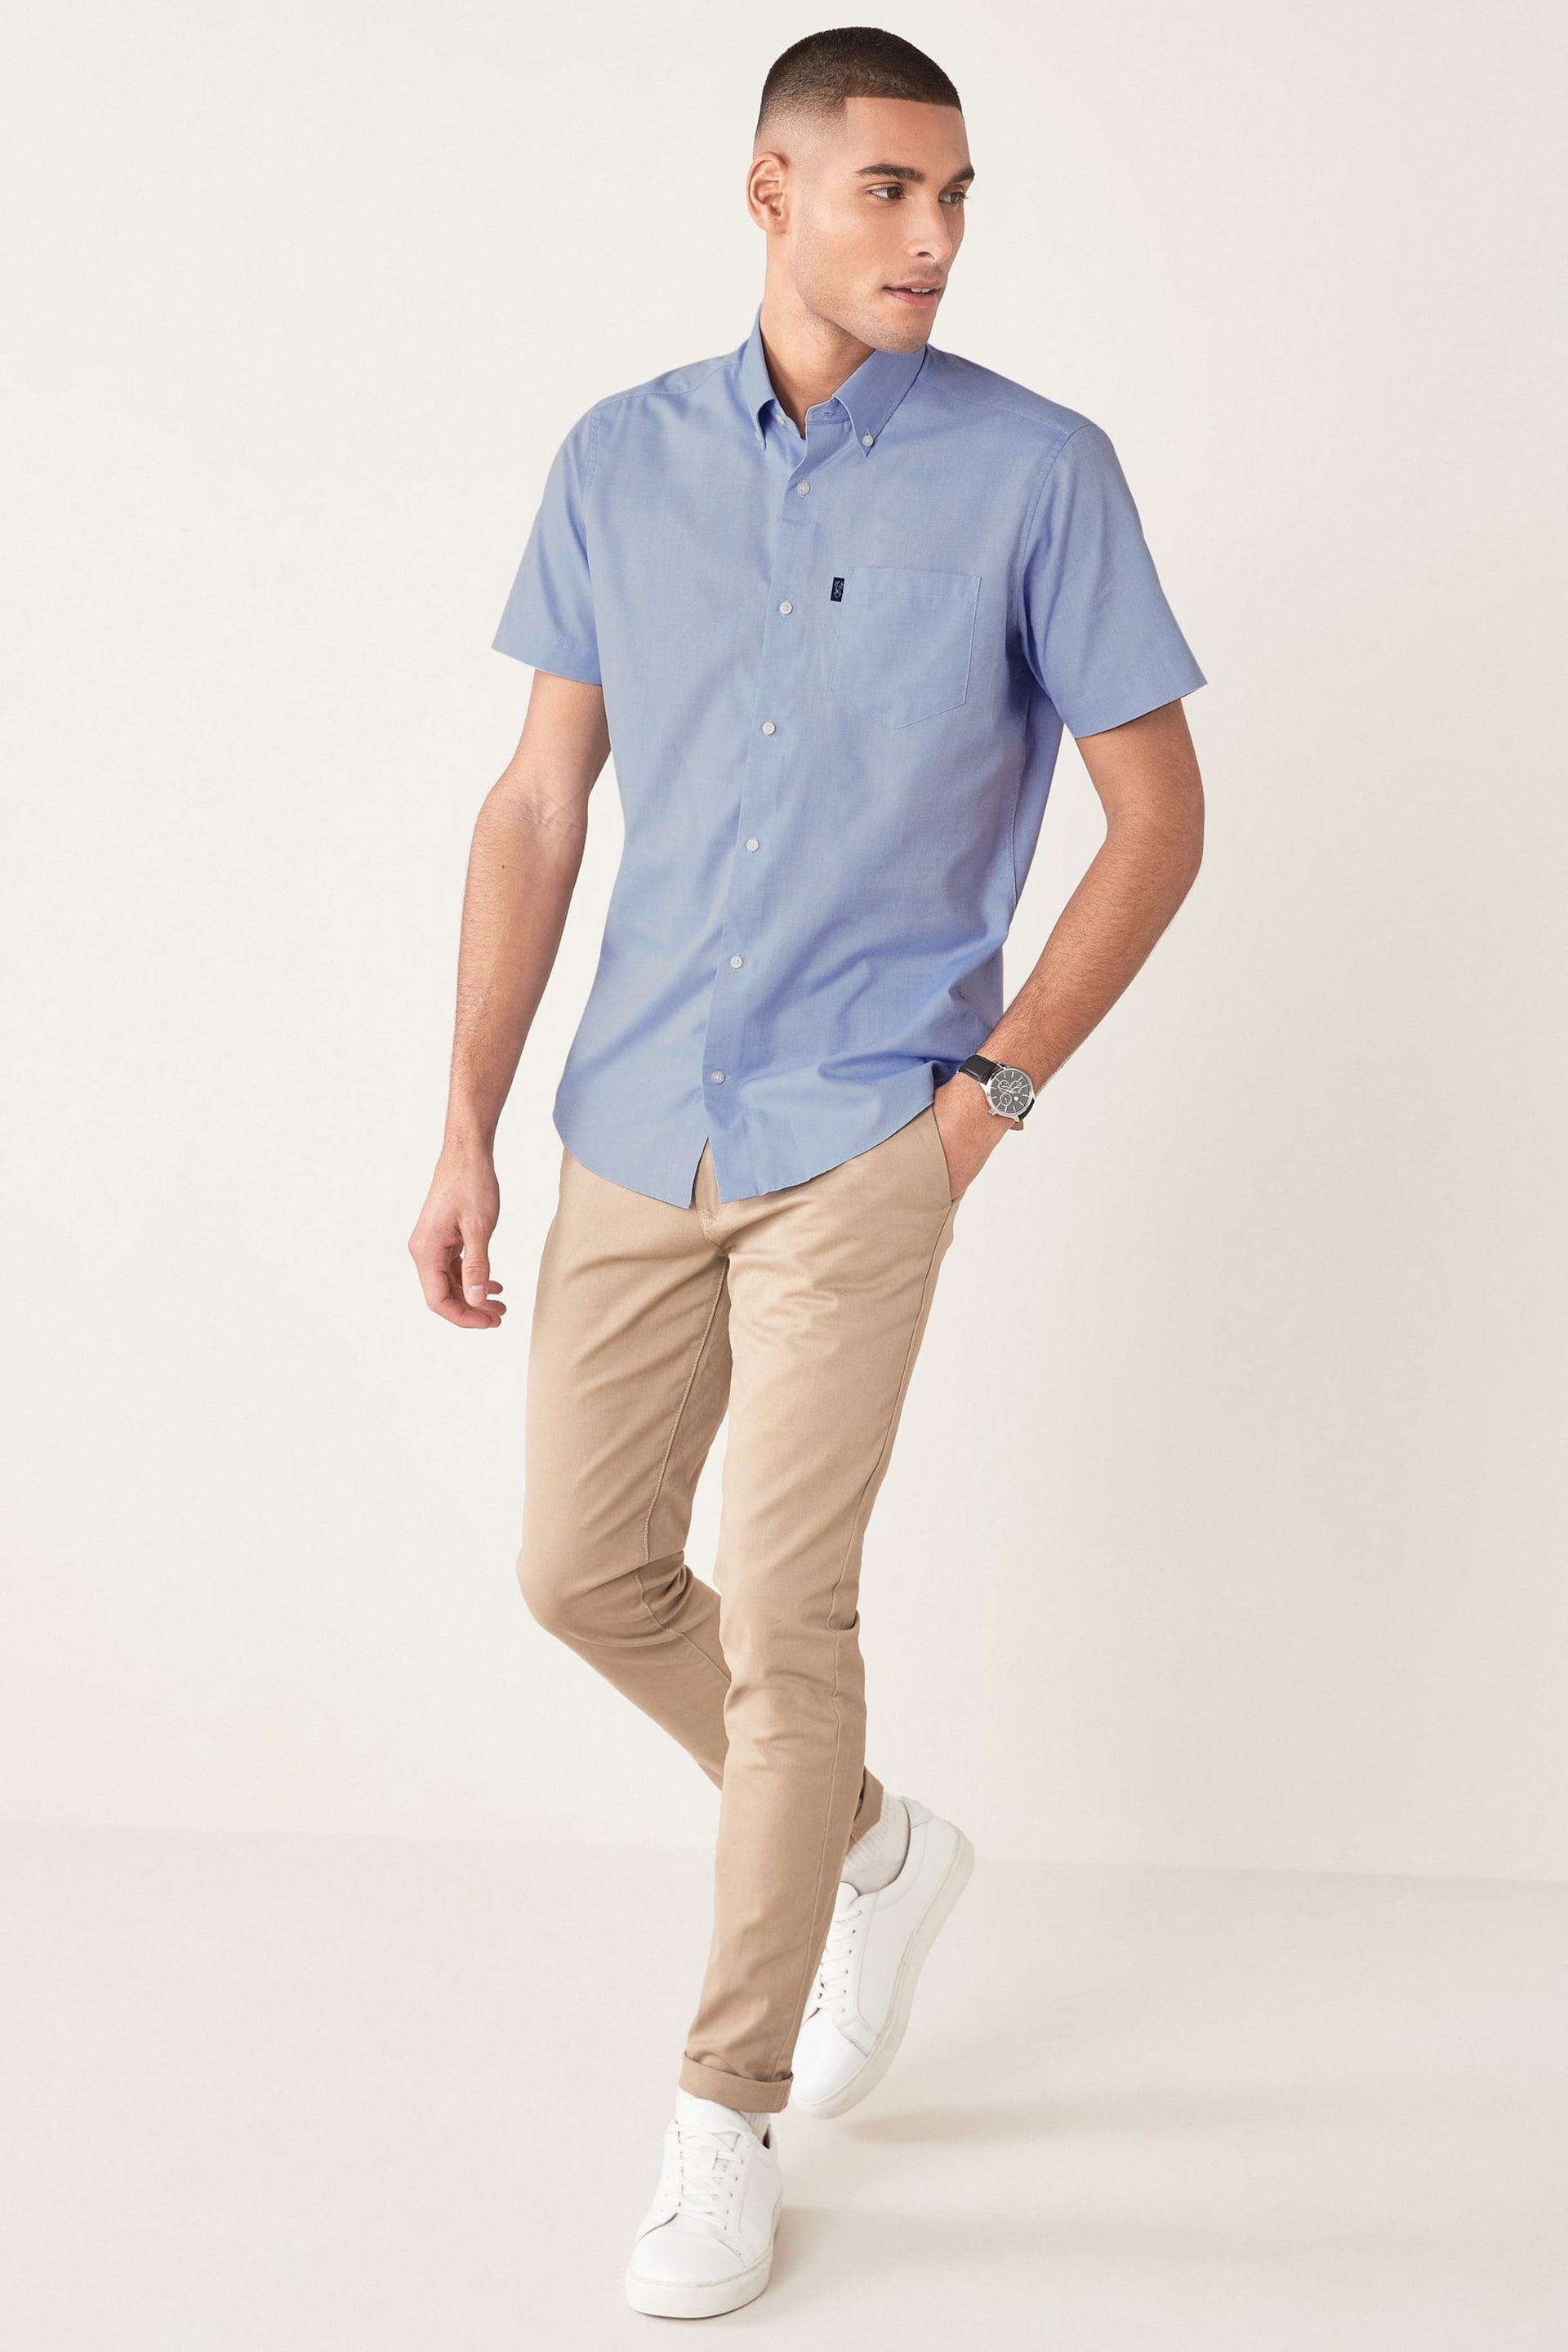 Pale Blue Slim Fit Easy Iron Button Down Oxford Shirt - Image 3 of 6